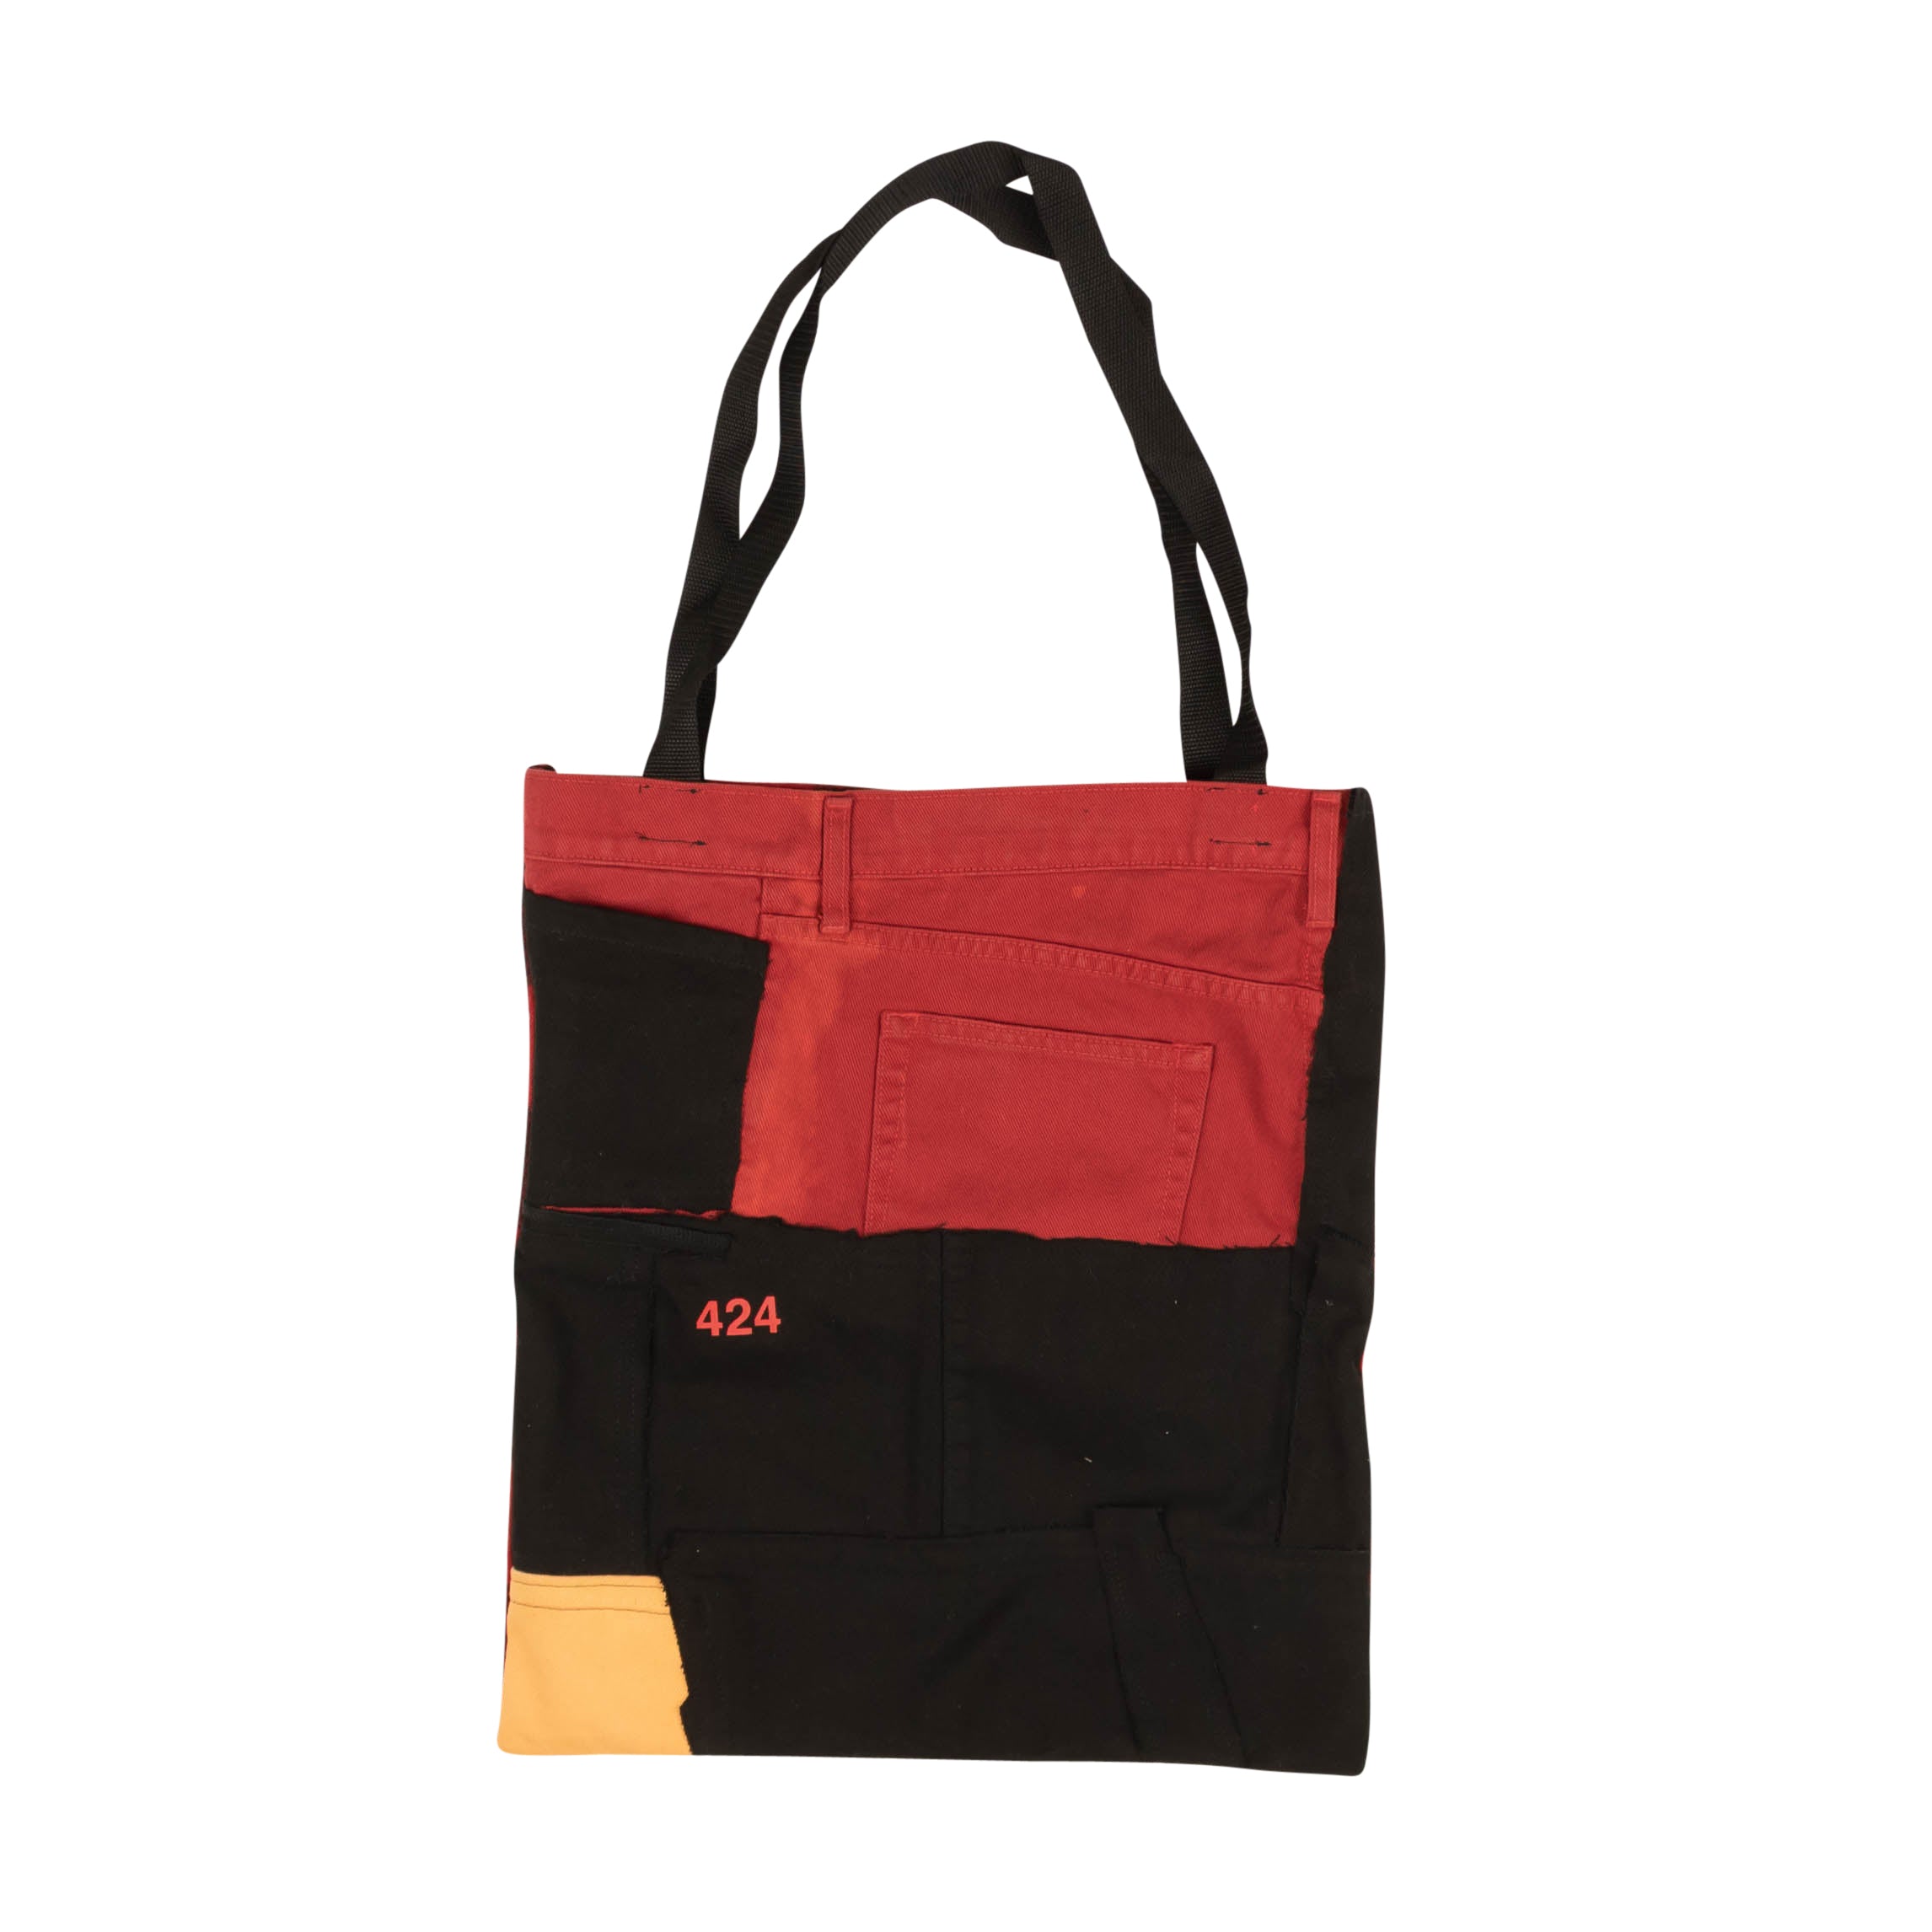 424 On Fairfax Tote Bag - Black/Red